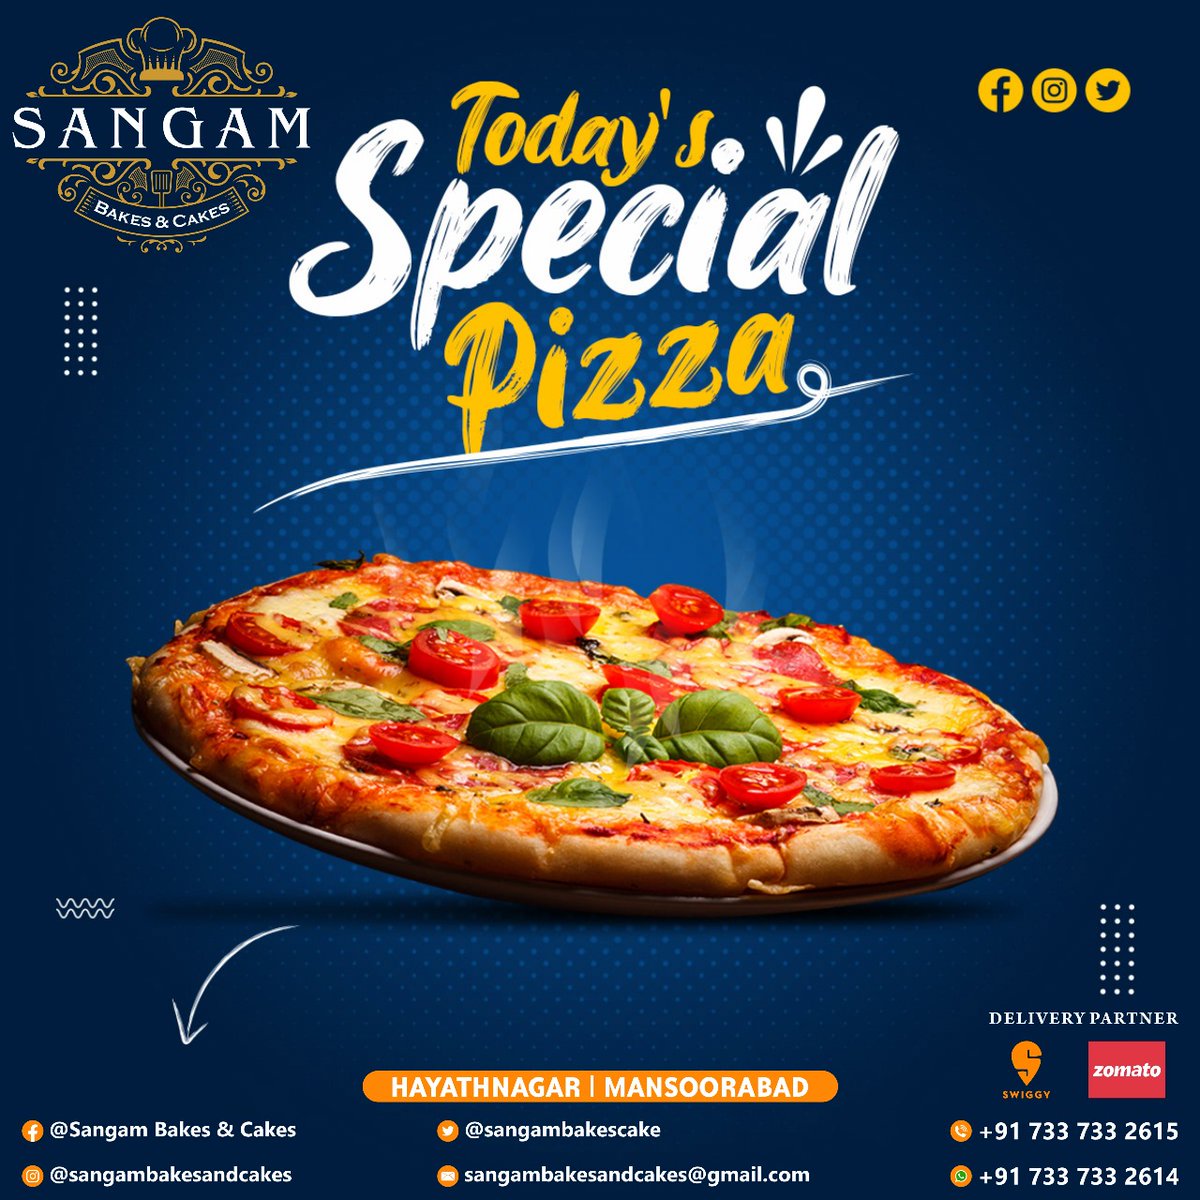 Today's Special Pizza! @sangambcmanso

#pizza #pizzatime #pizzalover #pizzahut #pizzas #pizzaria #pizzalovers #pizzaparty #pizzanapoletana #pizzalove #ilovepizza #homemadepizza #pizzagram #pizzaislife #pizzanight   #food #foodporn #foodblogger #sangamhotels